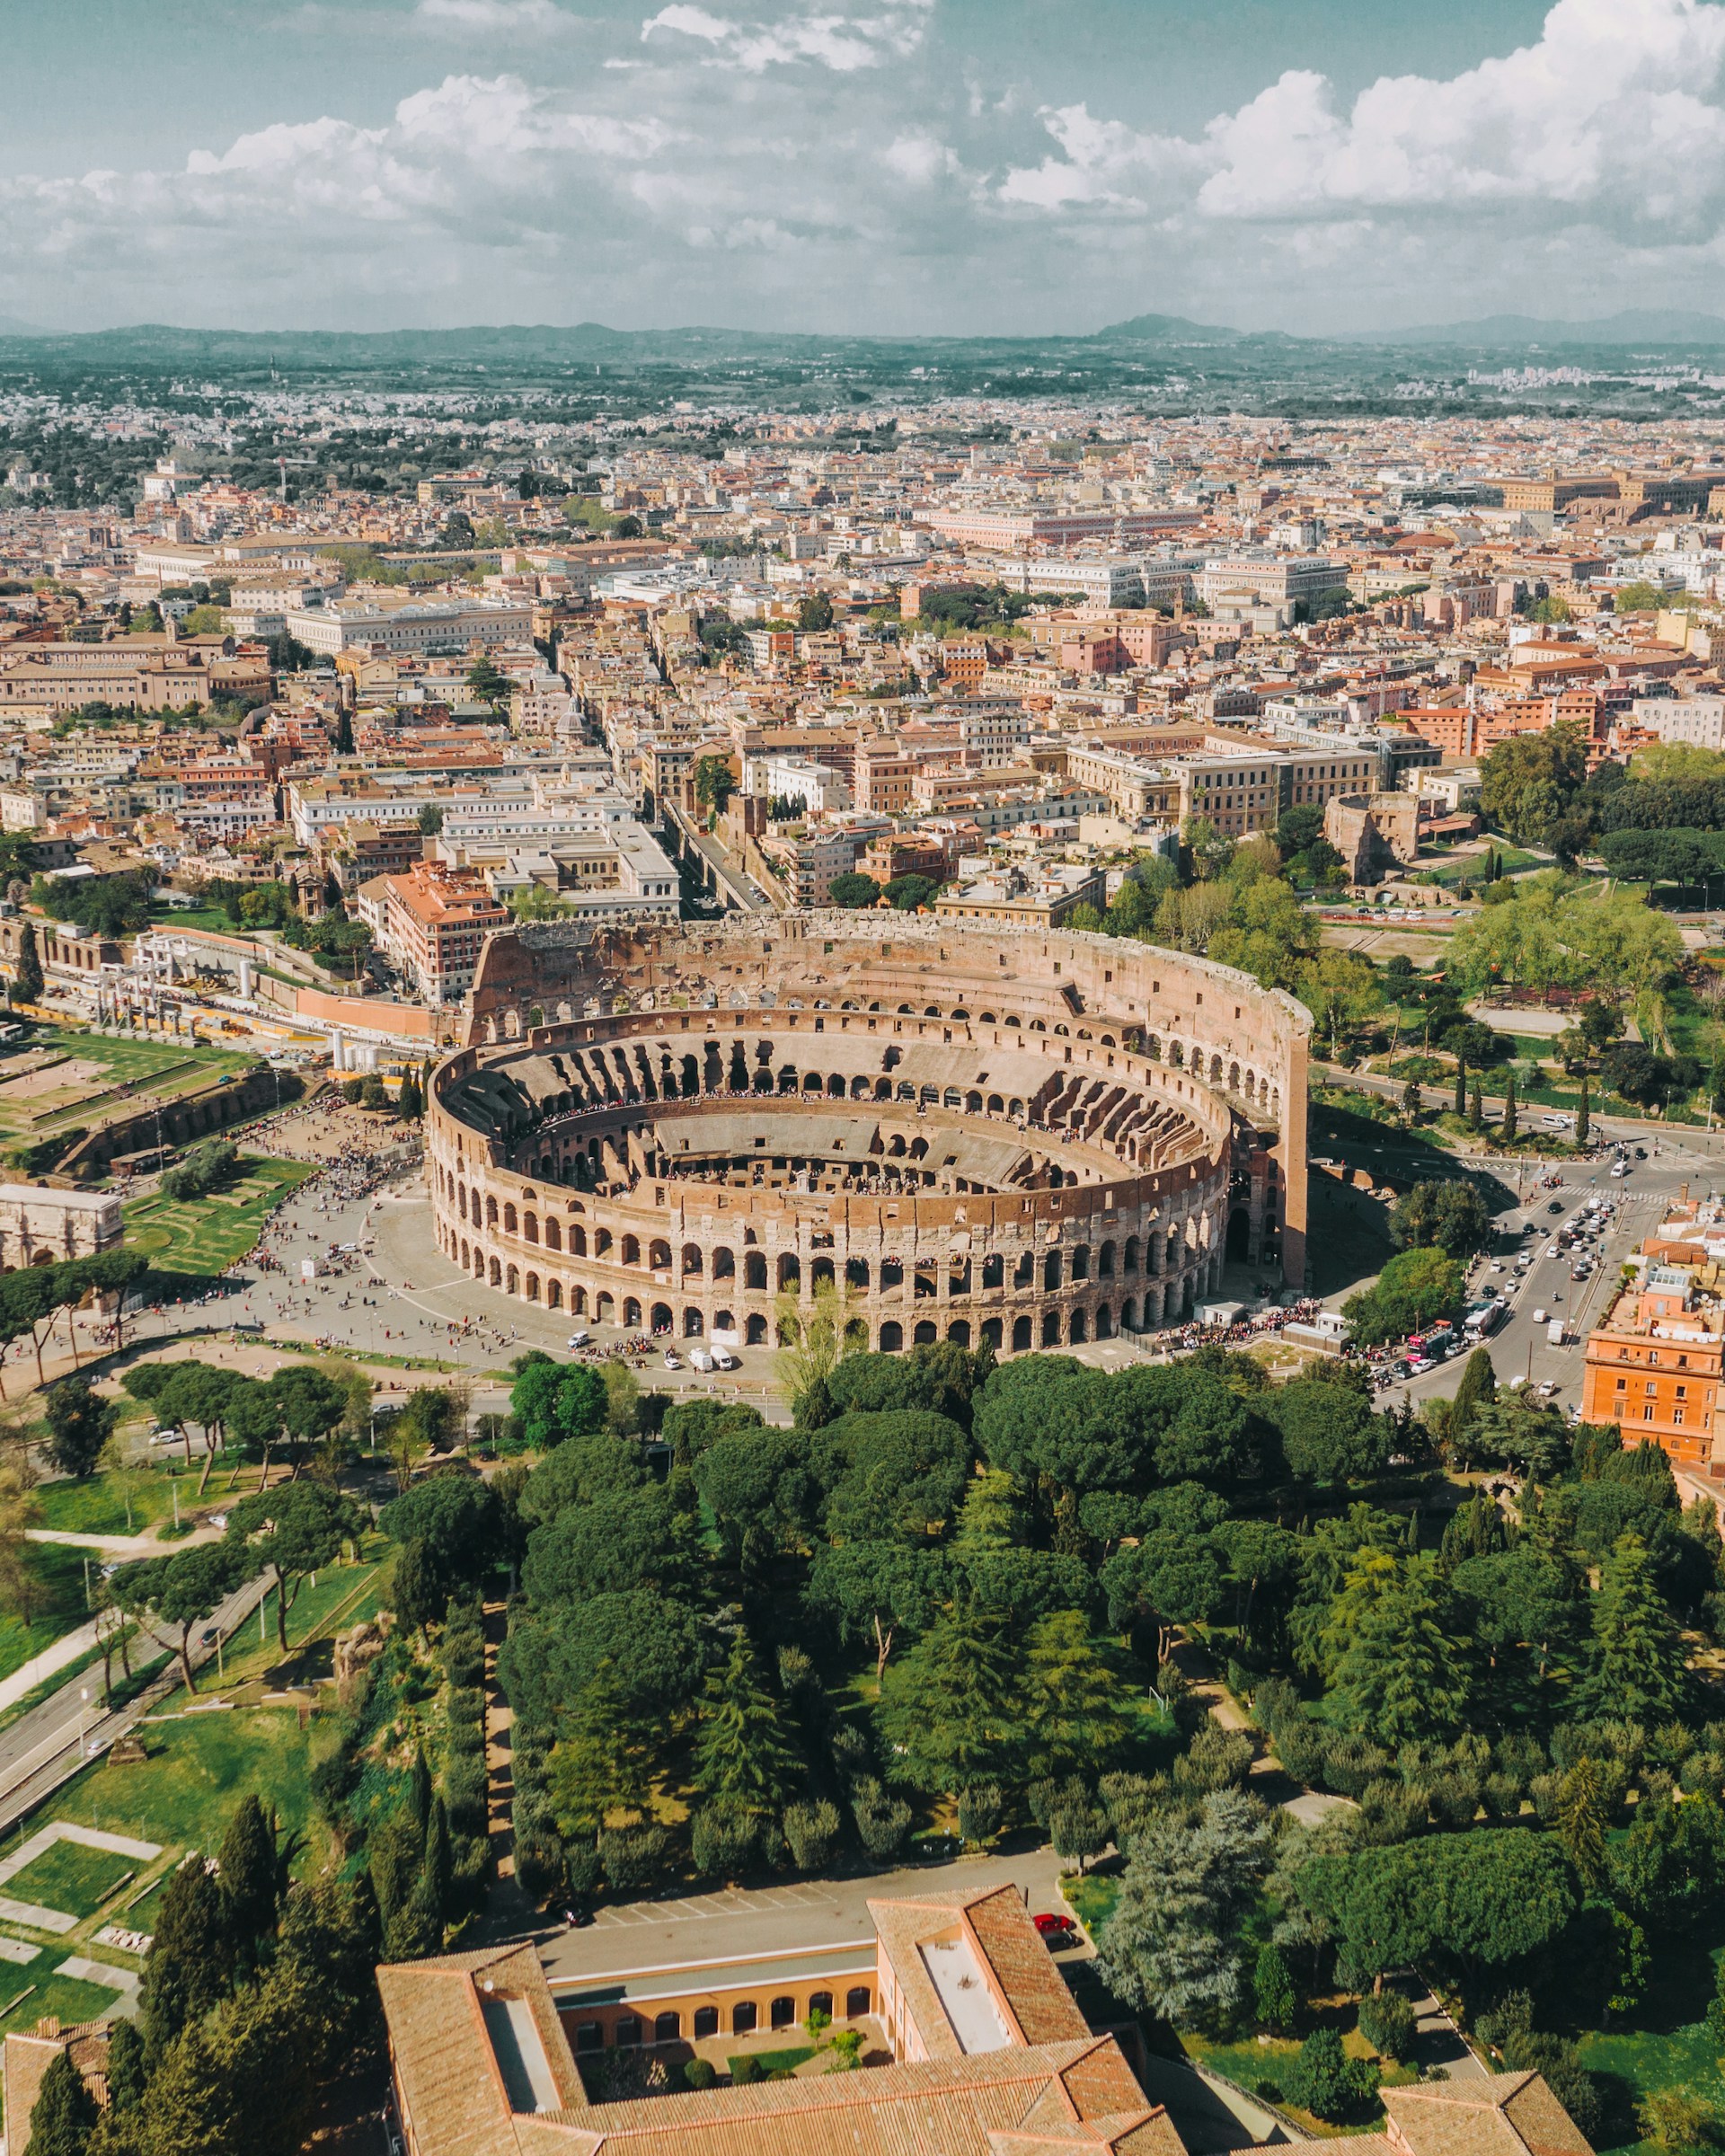 <p>Known as the 'Eternal City', Rome's captivates tourists with ancient ruins like the Colosseum and Roman Forum and religious sites like St. Peter's Basilica. The city is full of art and historical architecture, adding to its charm.</p>